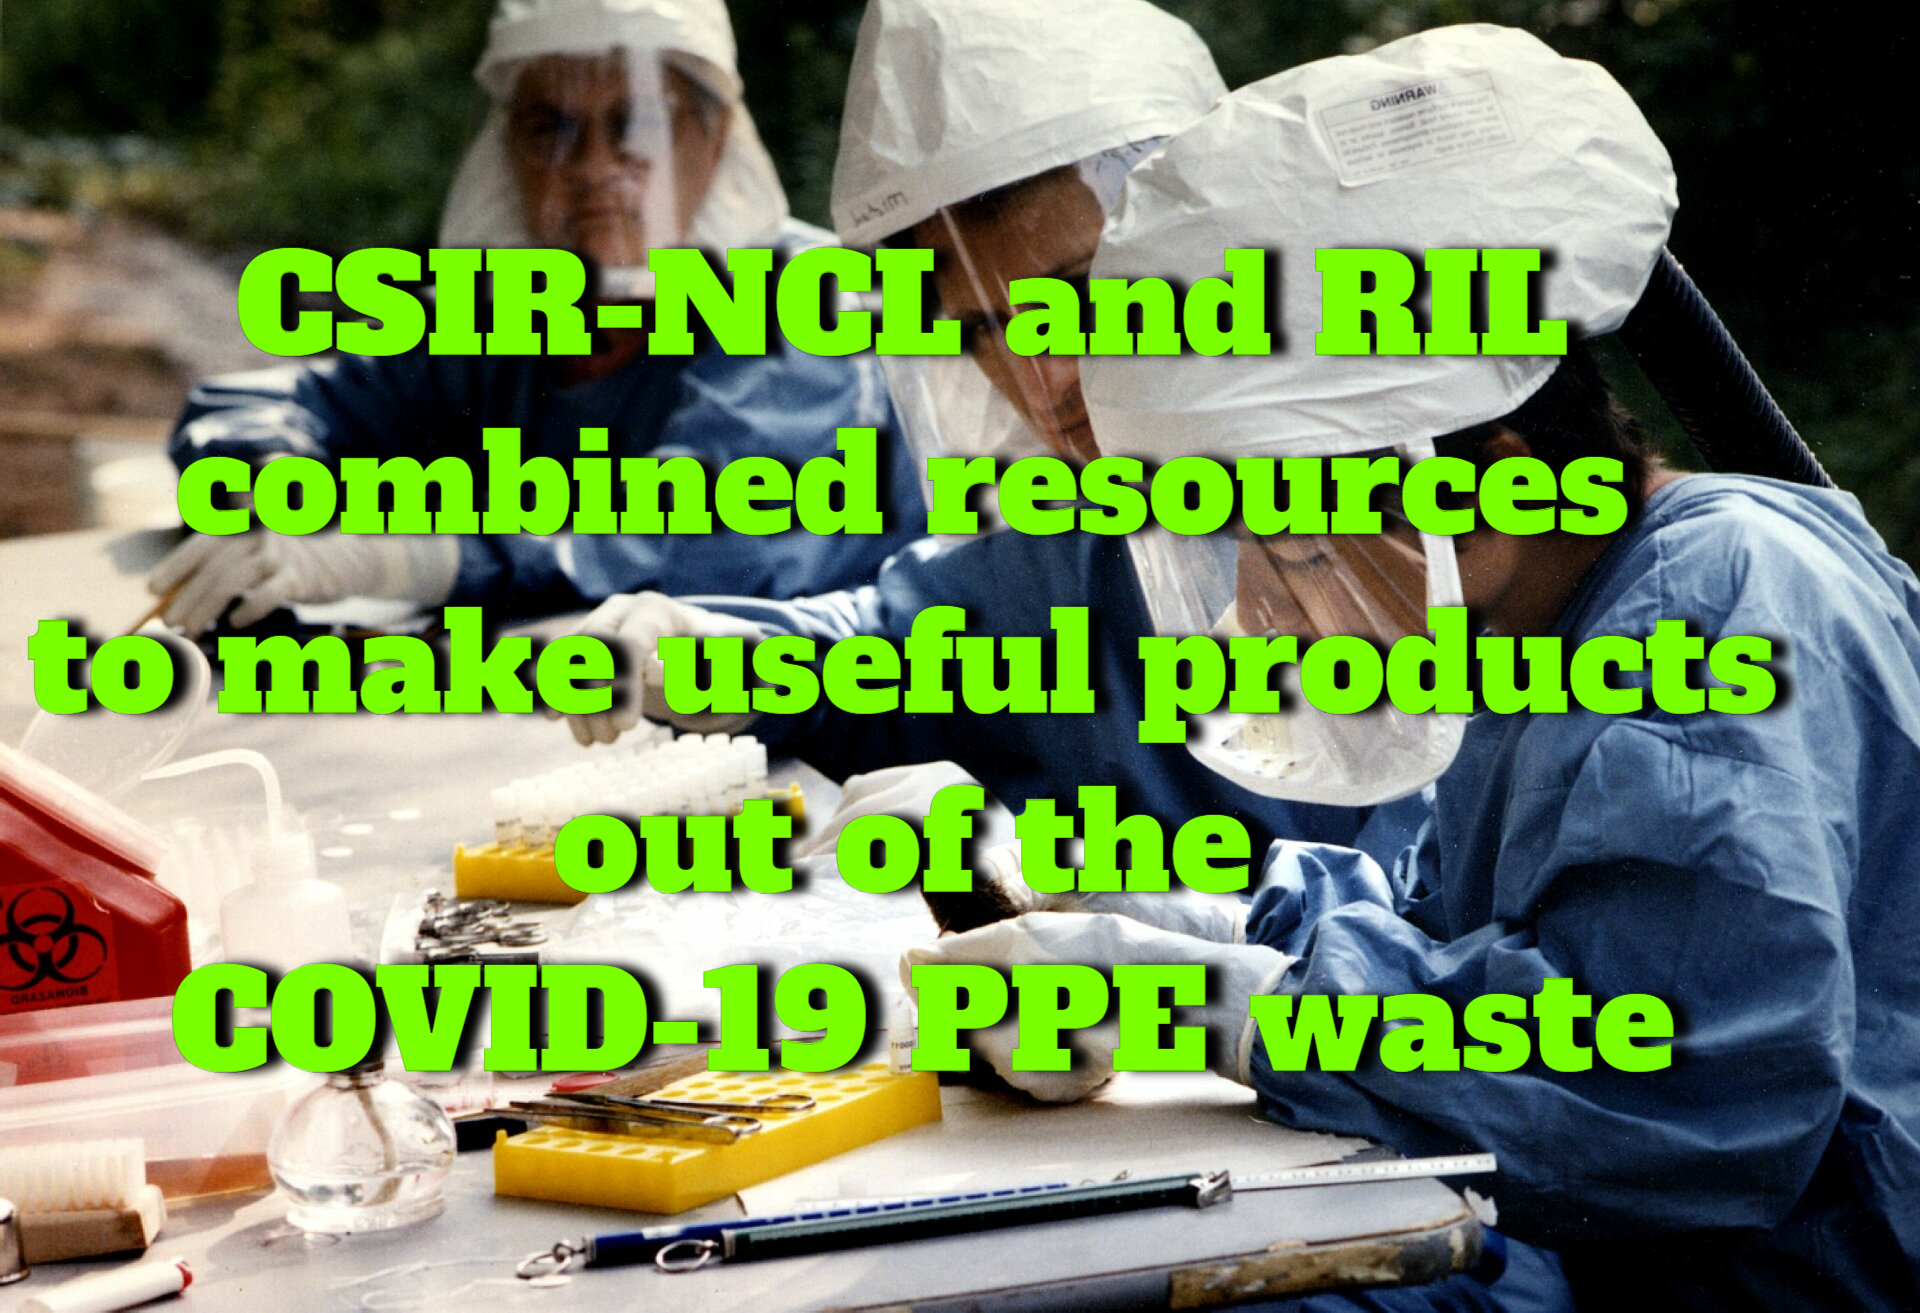 CSIR-NCL, RIL team pooled resources to produce useful products from the COVID-19 PPE waste